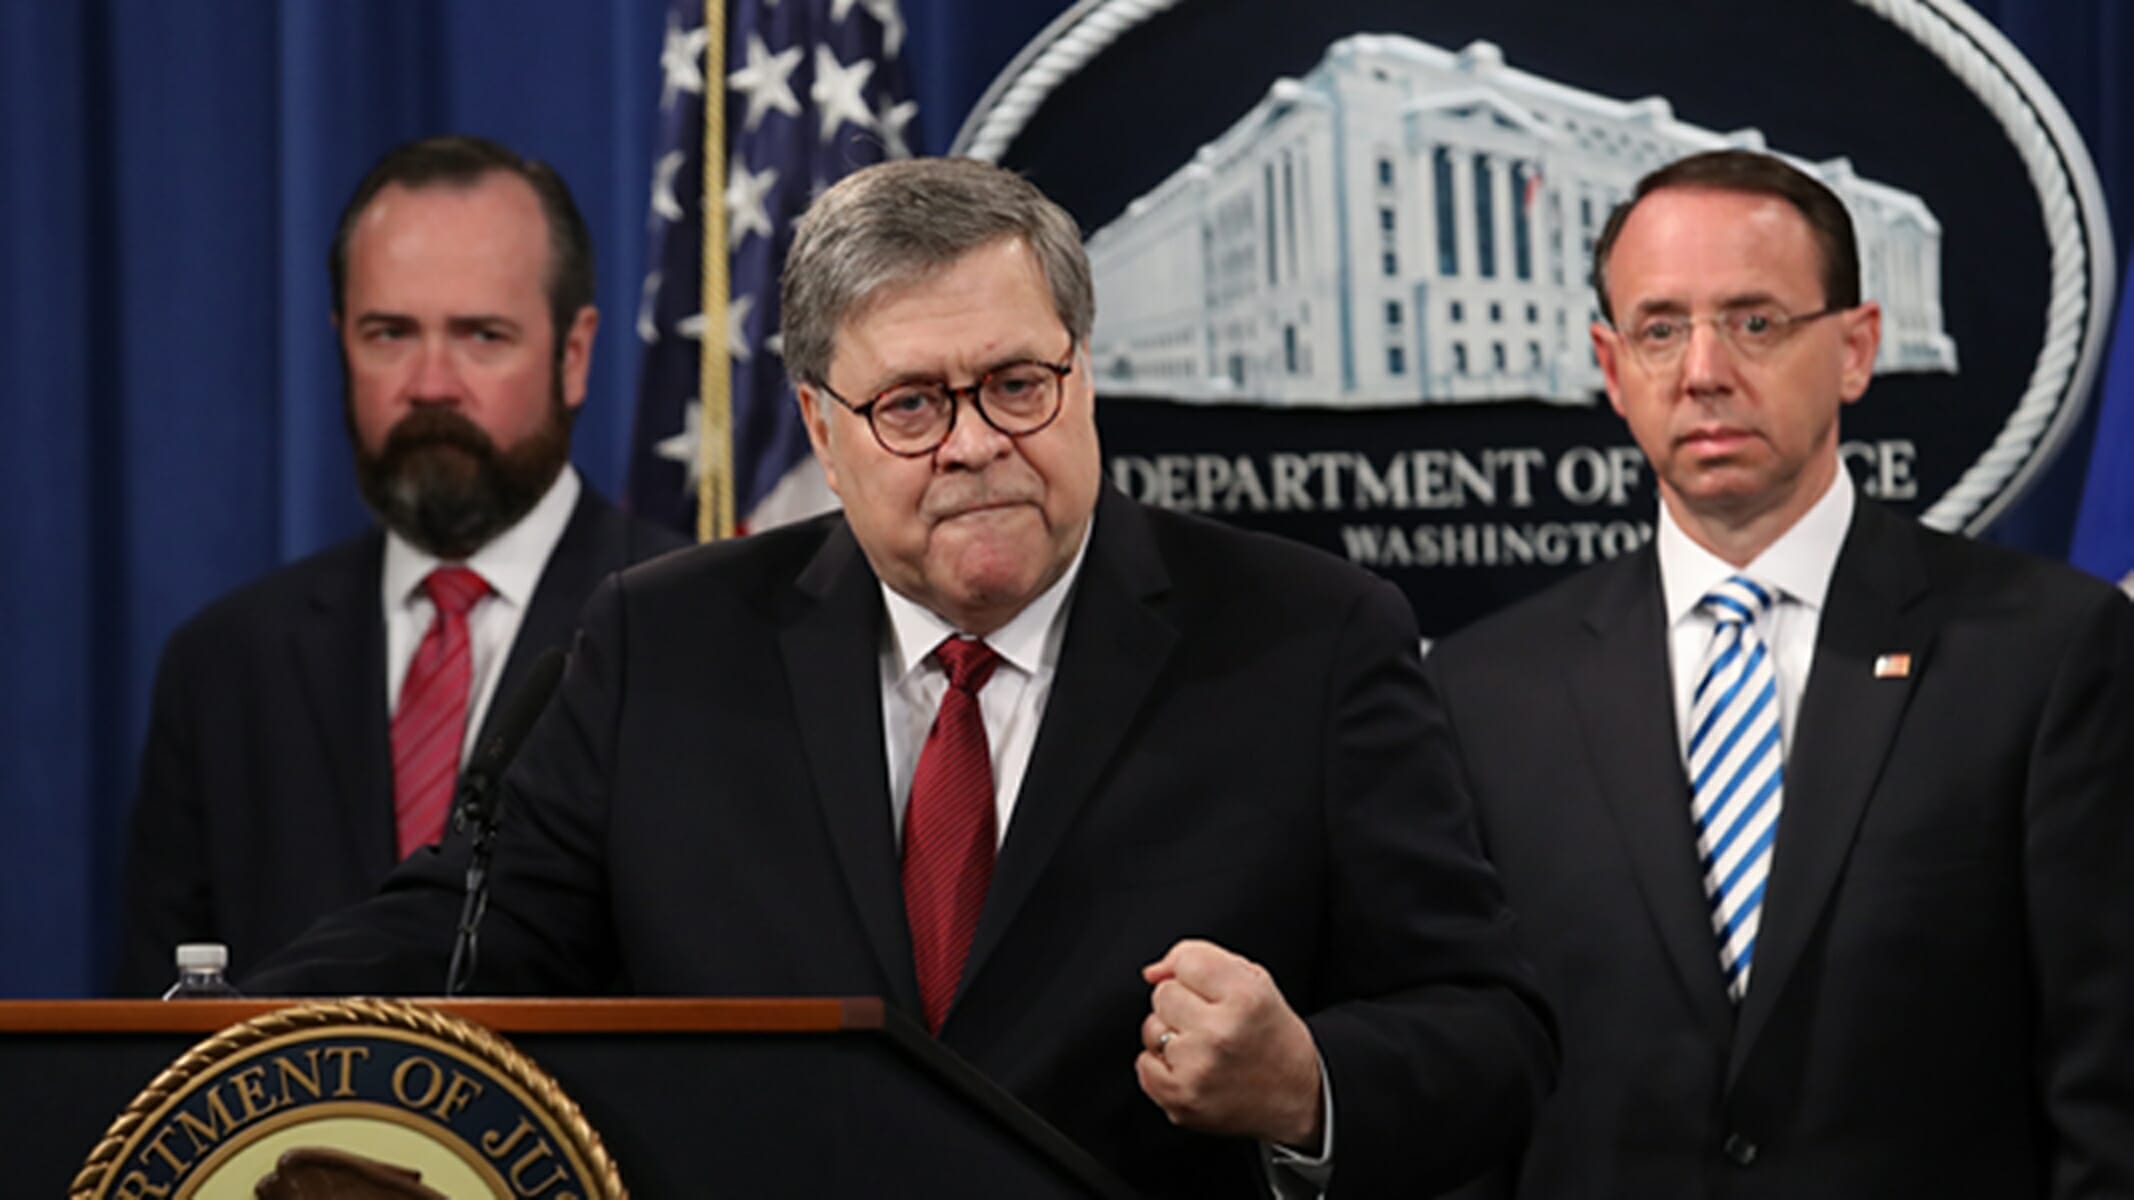 William Barr’s Press Conference on the Mueller Report Was the Farce We All Thought It Would Be